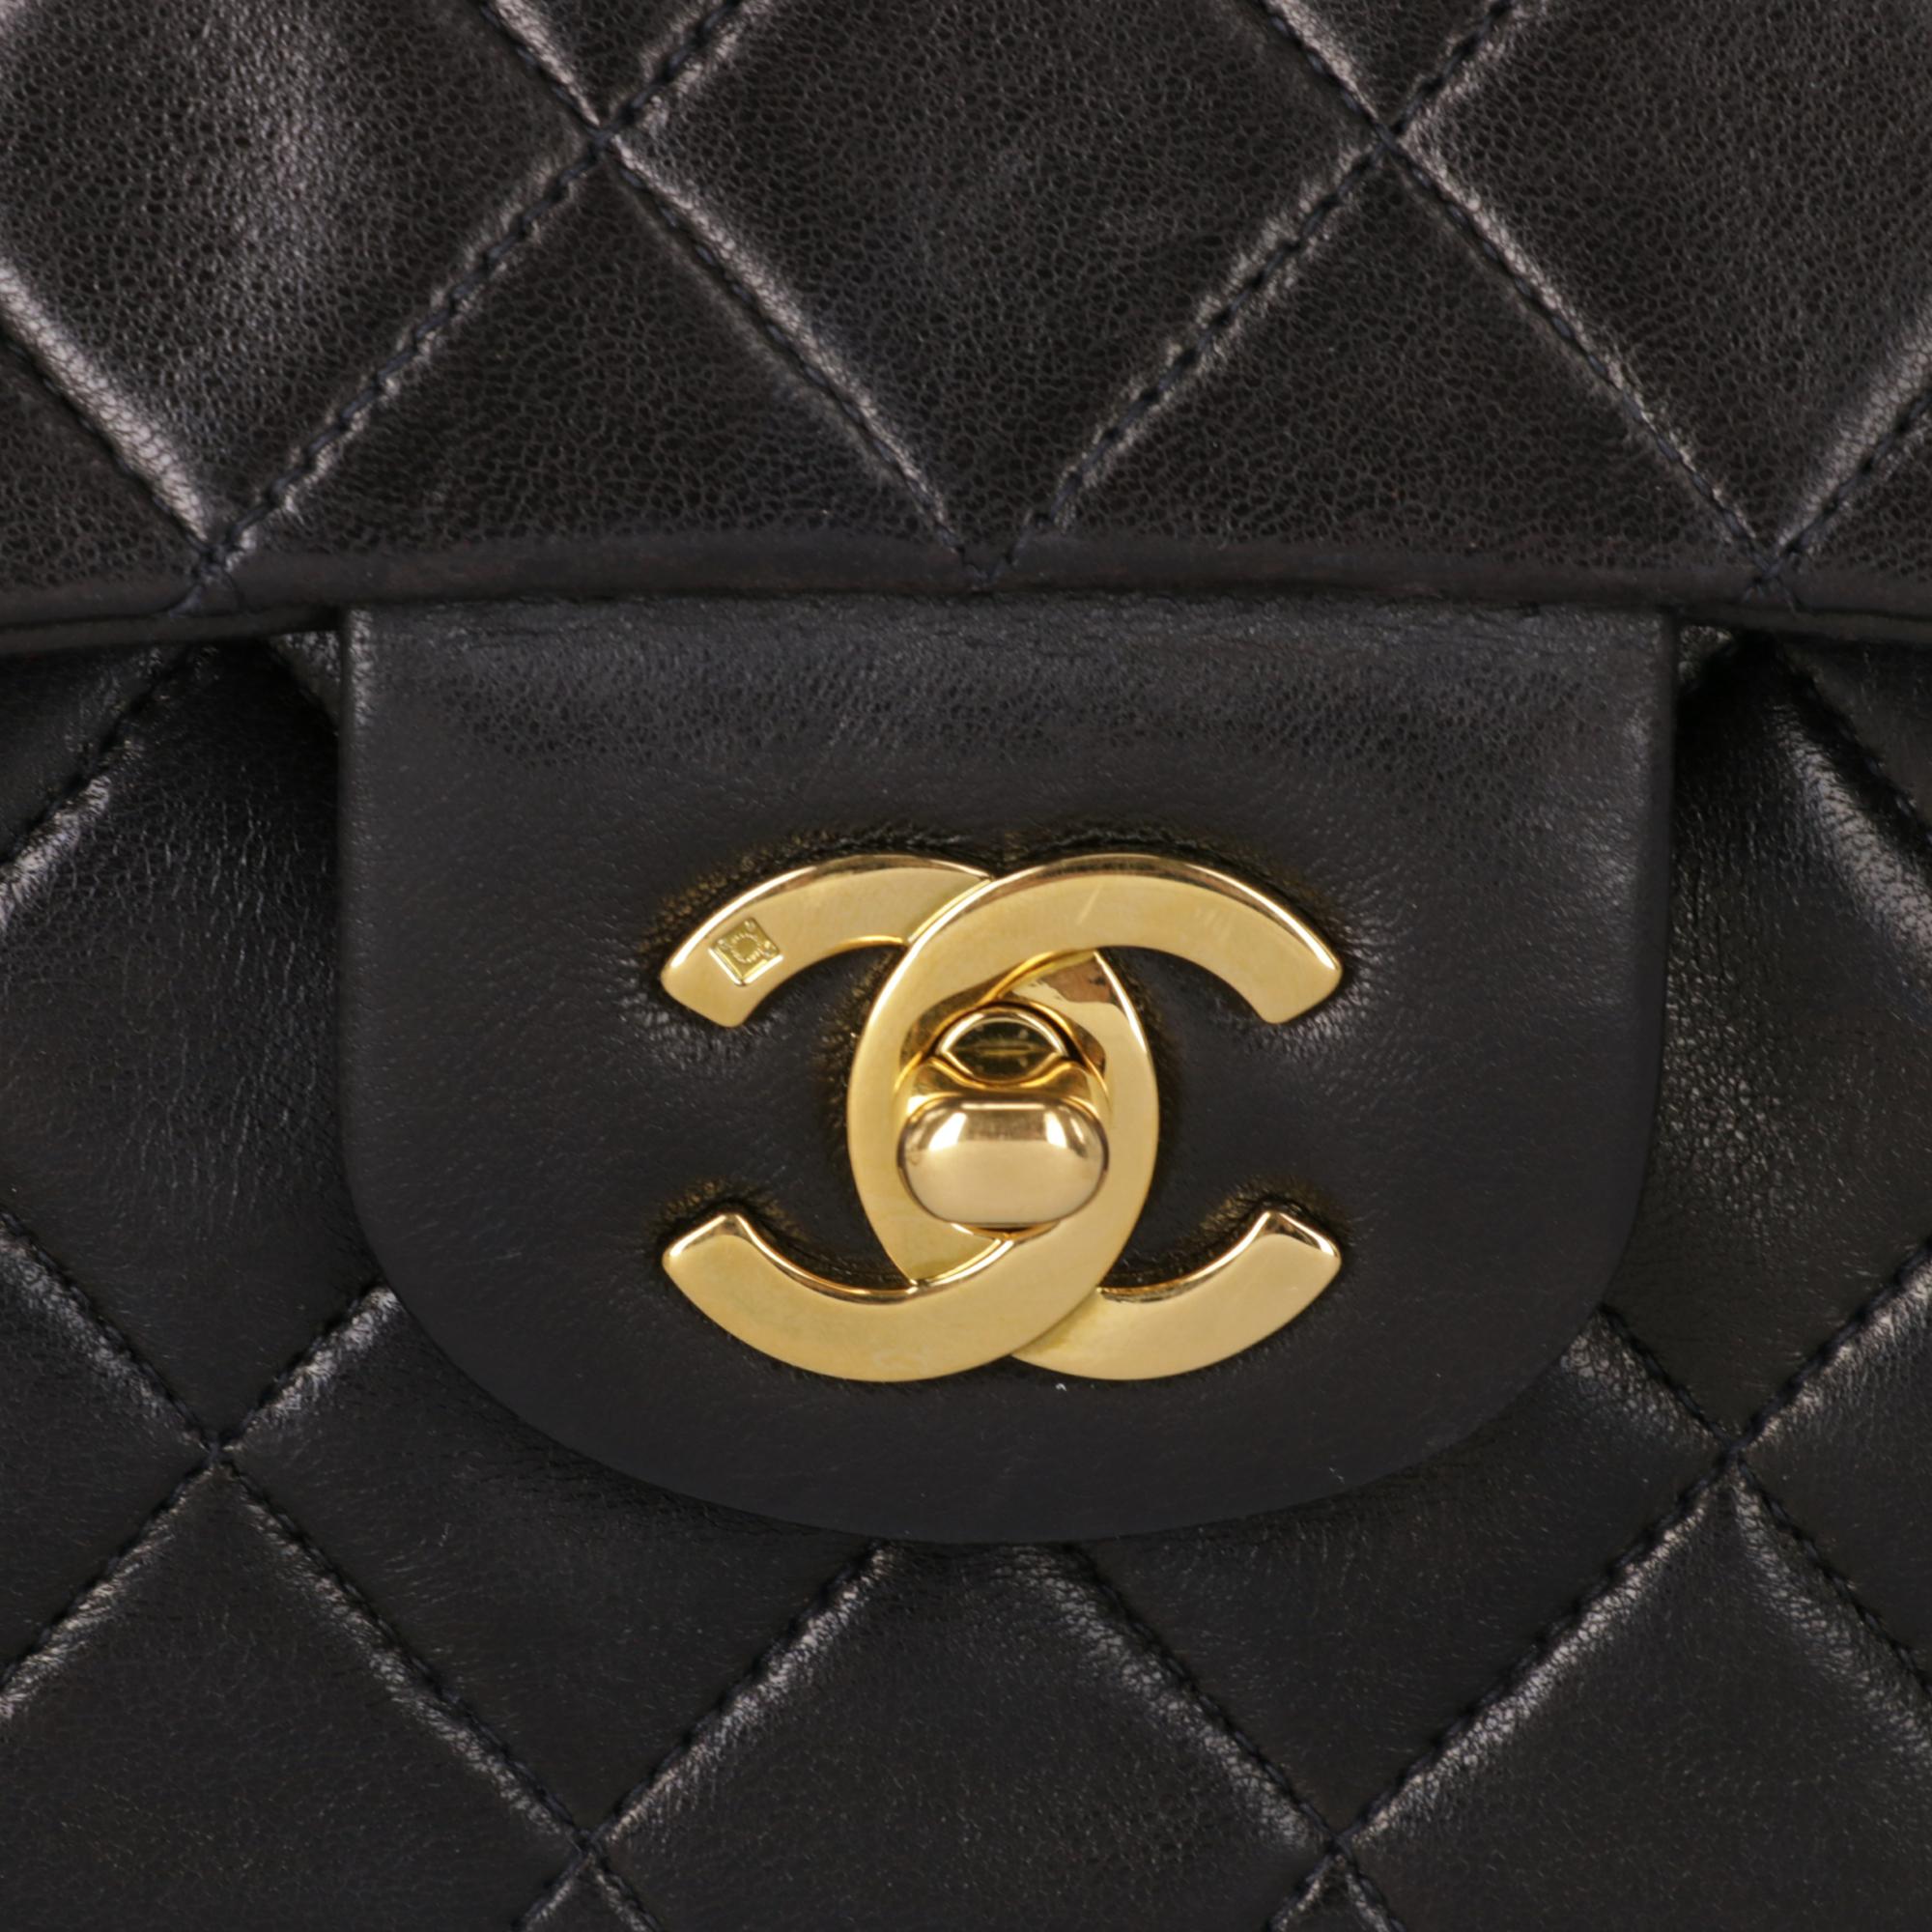 1990s Chanel 2.55 Black Leather Bag 25 cm With Chain 5